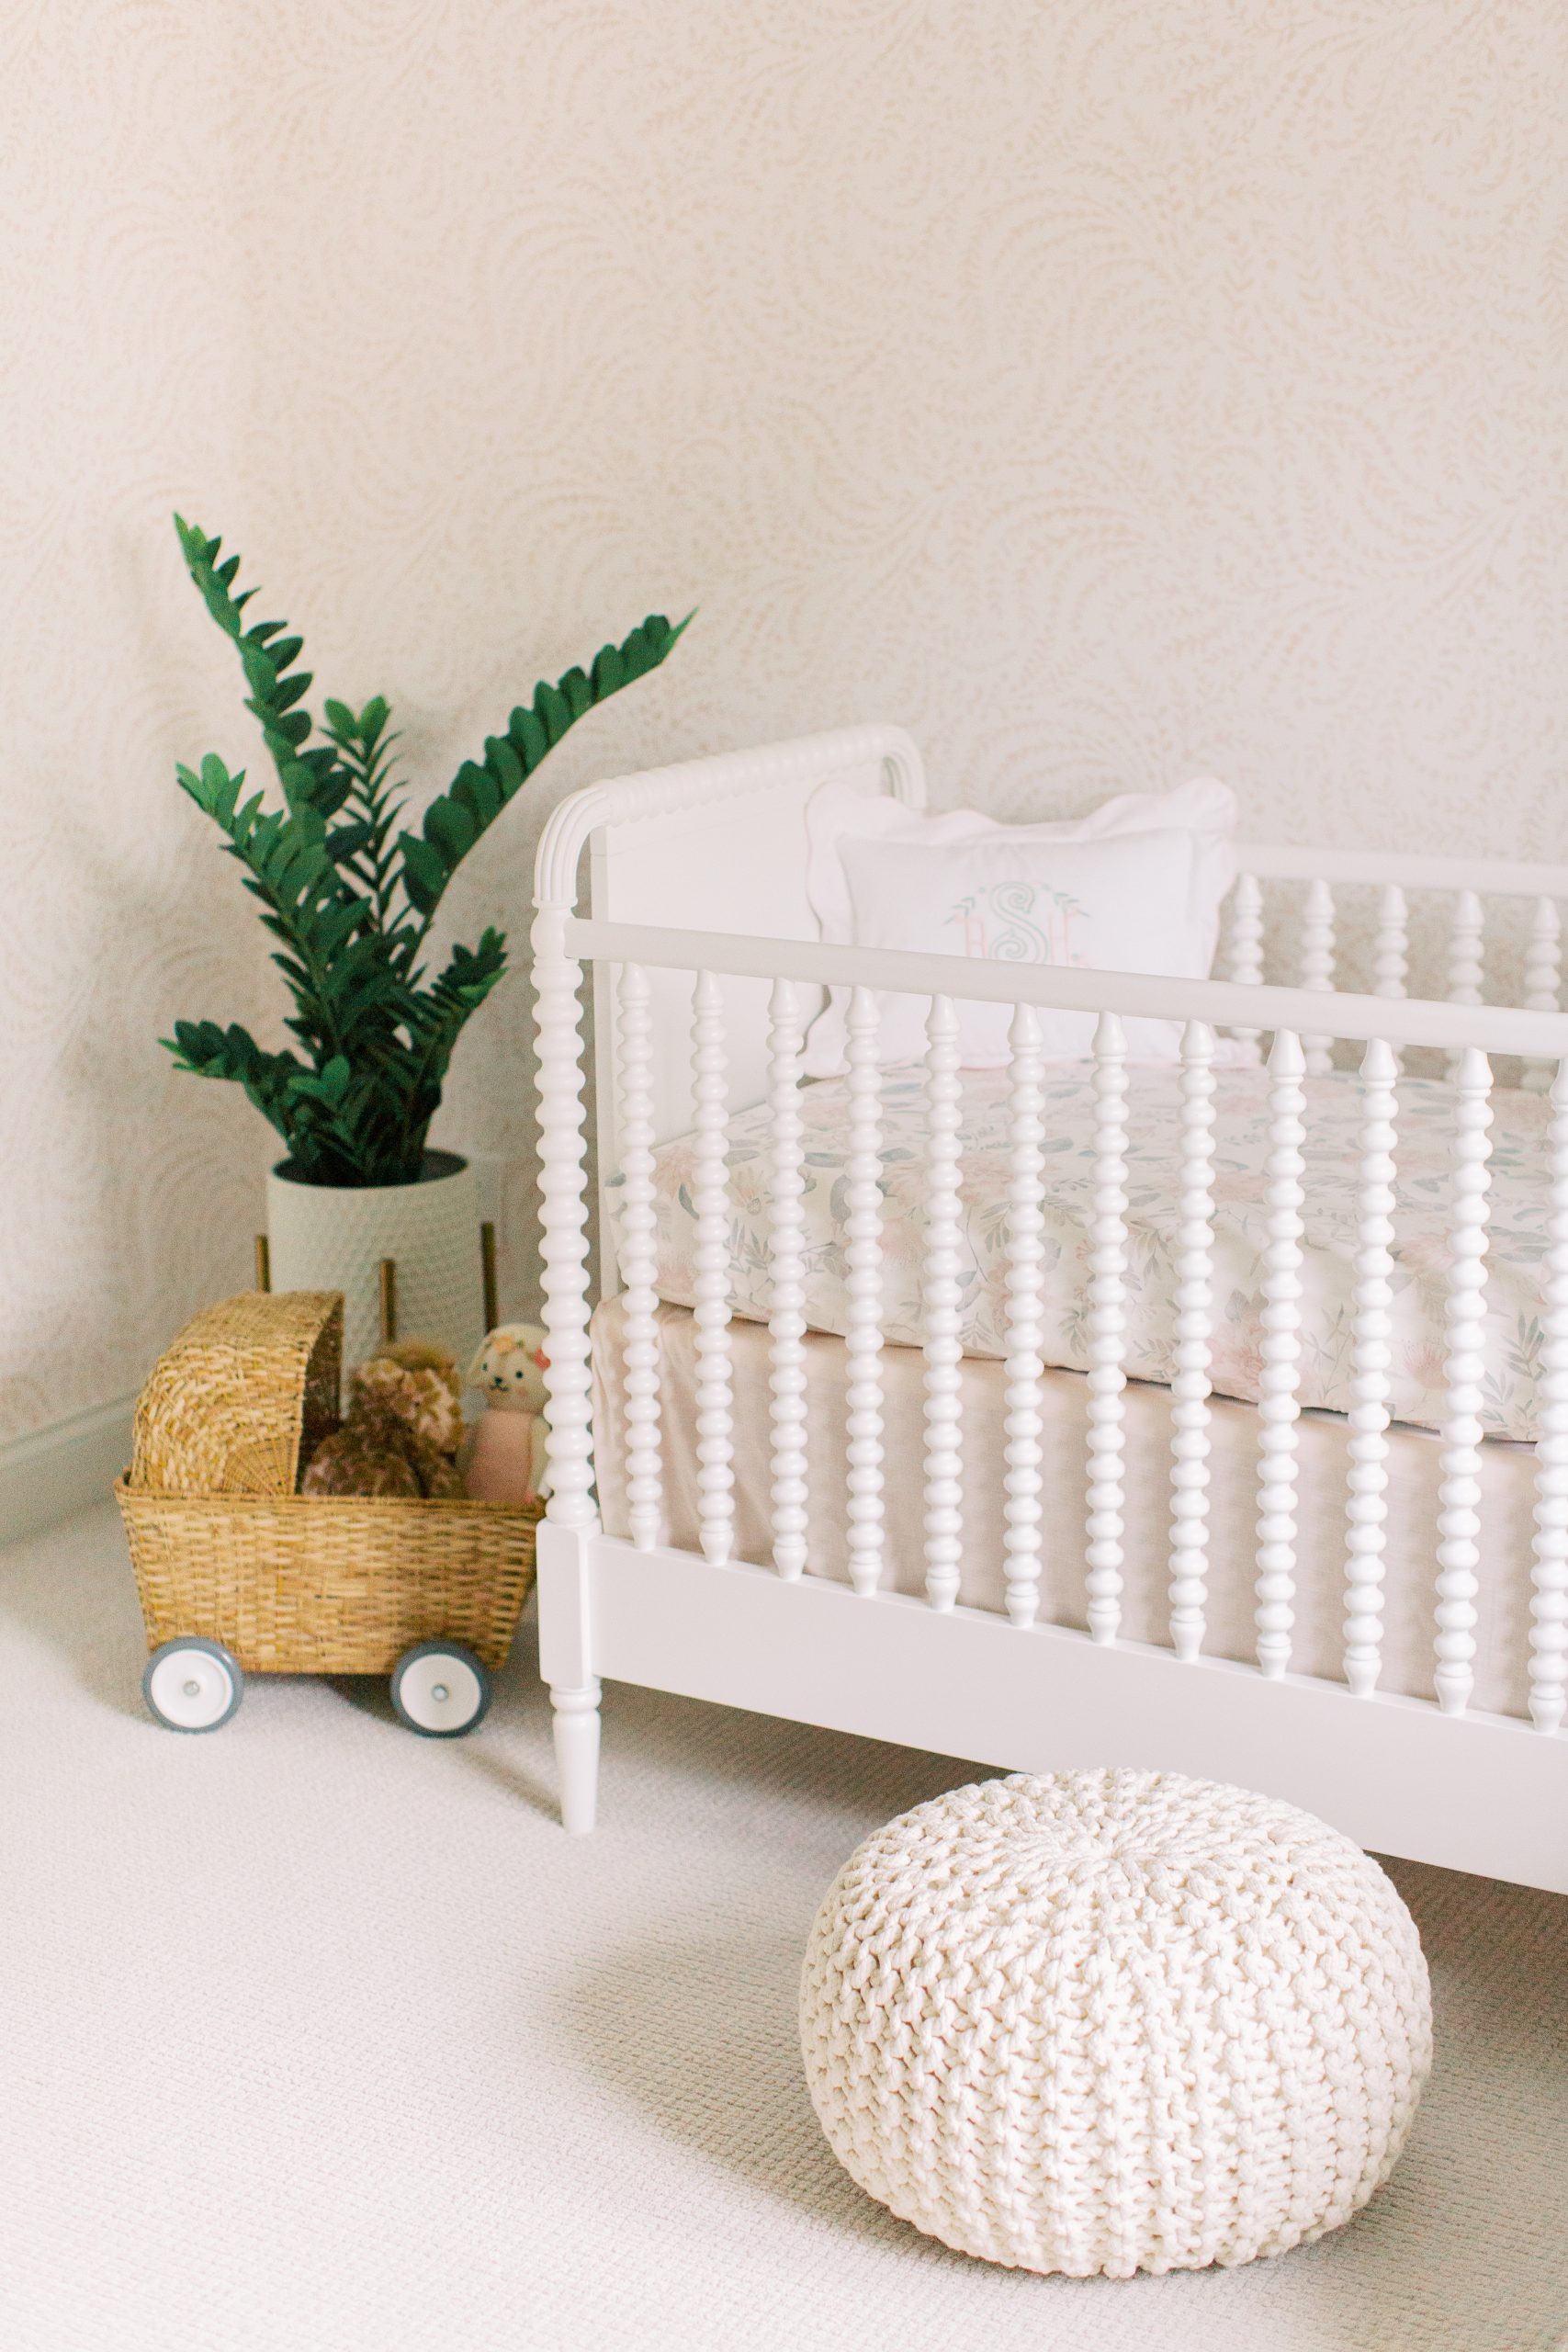 crate & kids Jenny Lind crib, white spindle crib